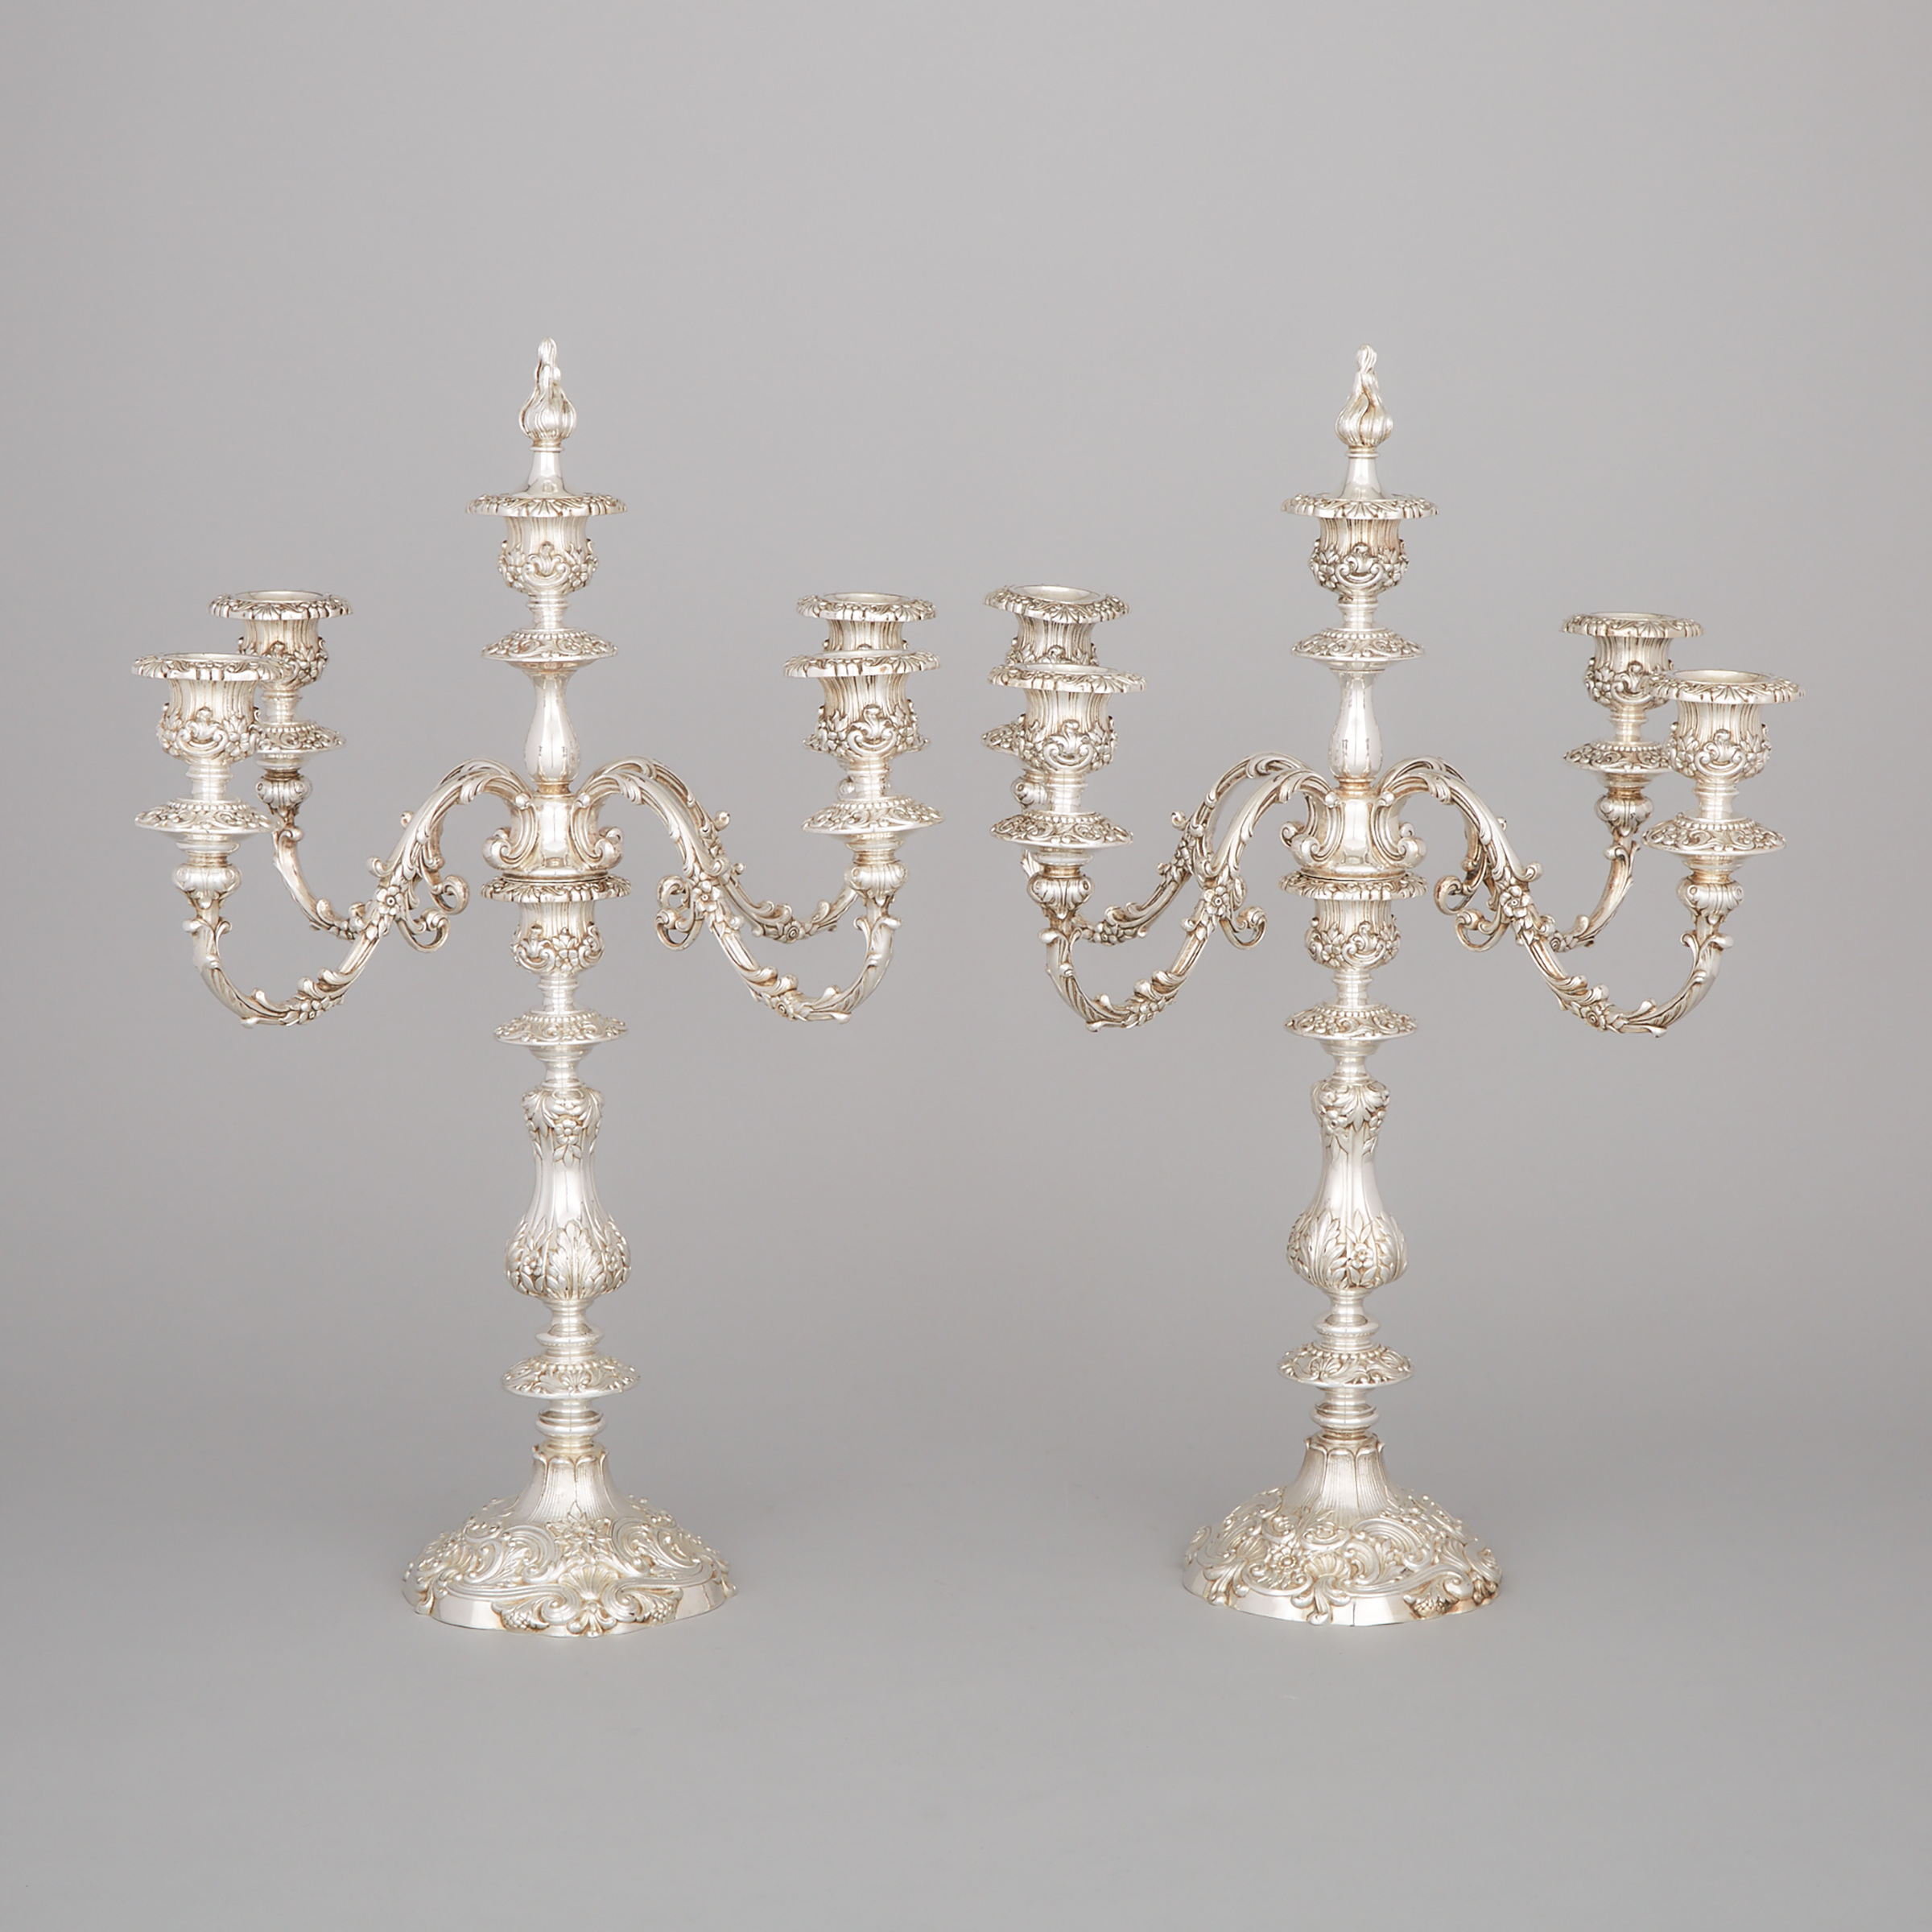 Pair of American Silver Plated Five-Light Candelabra, 20th century